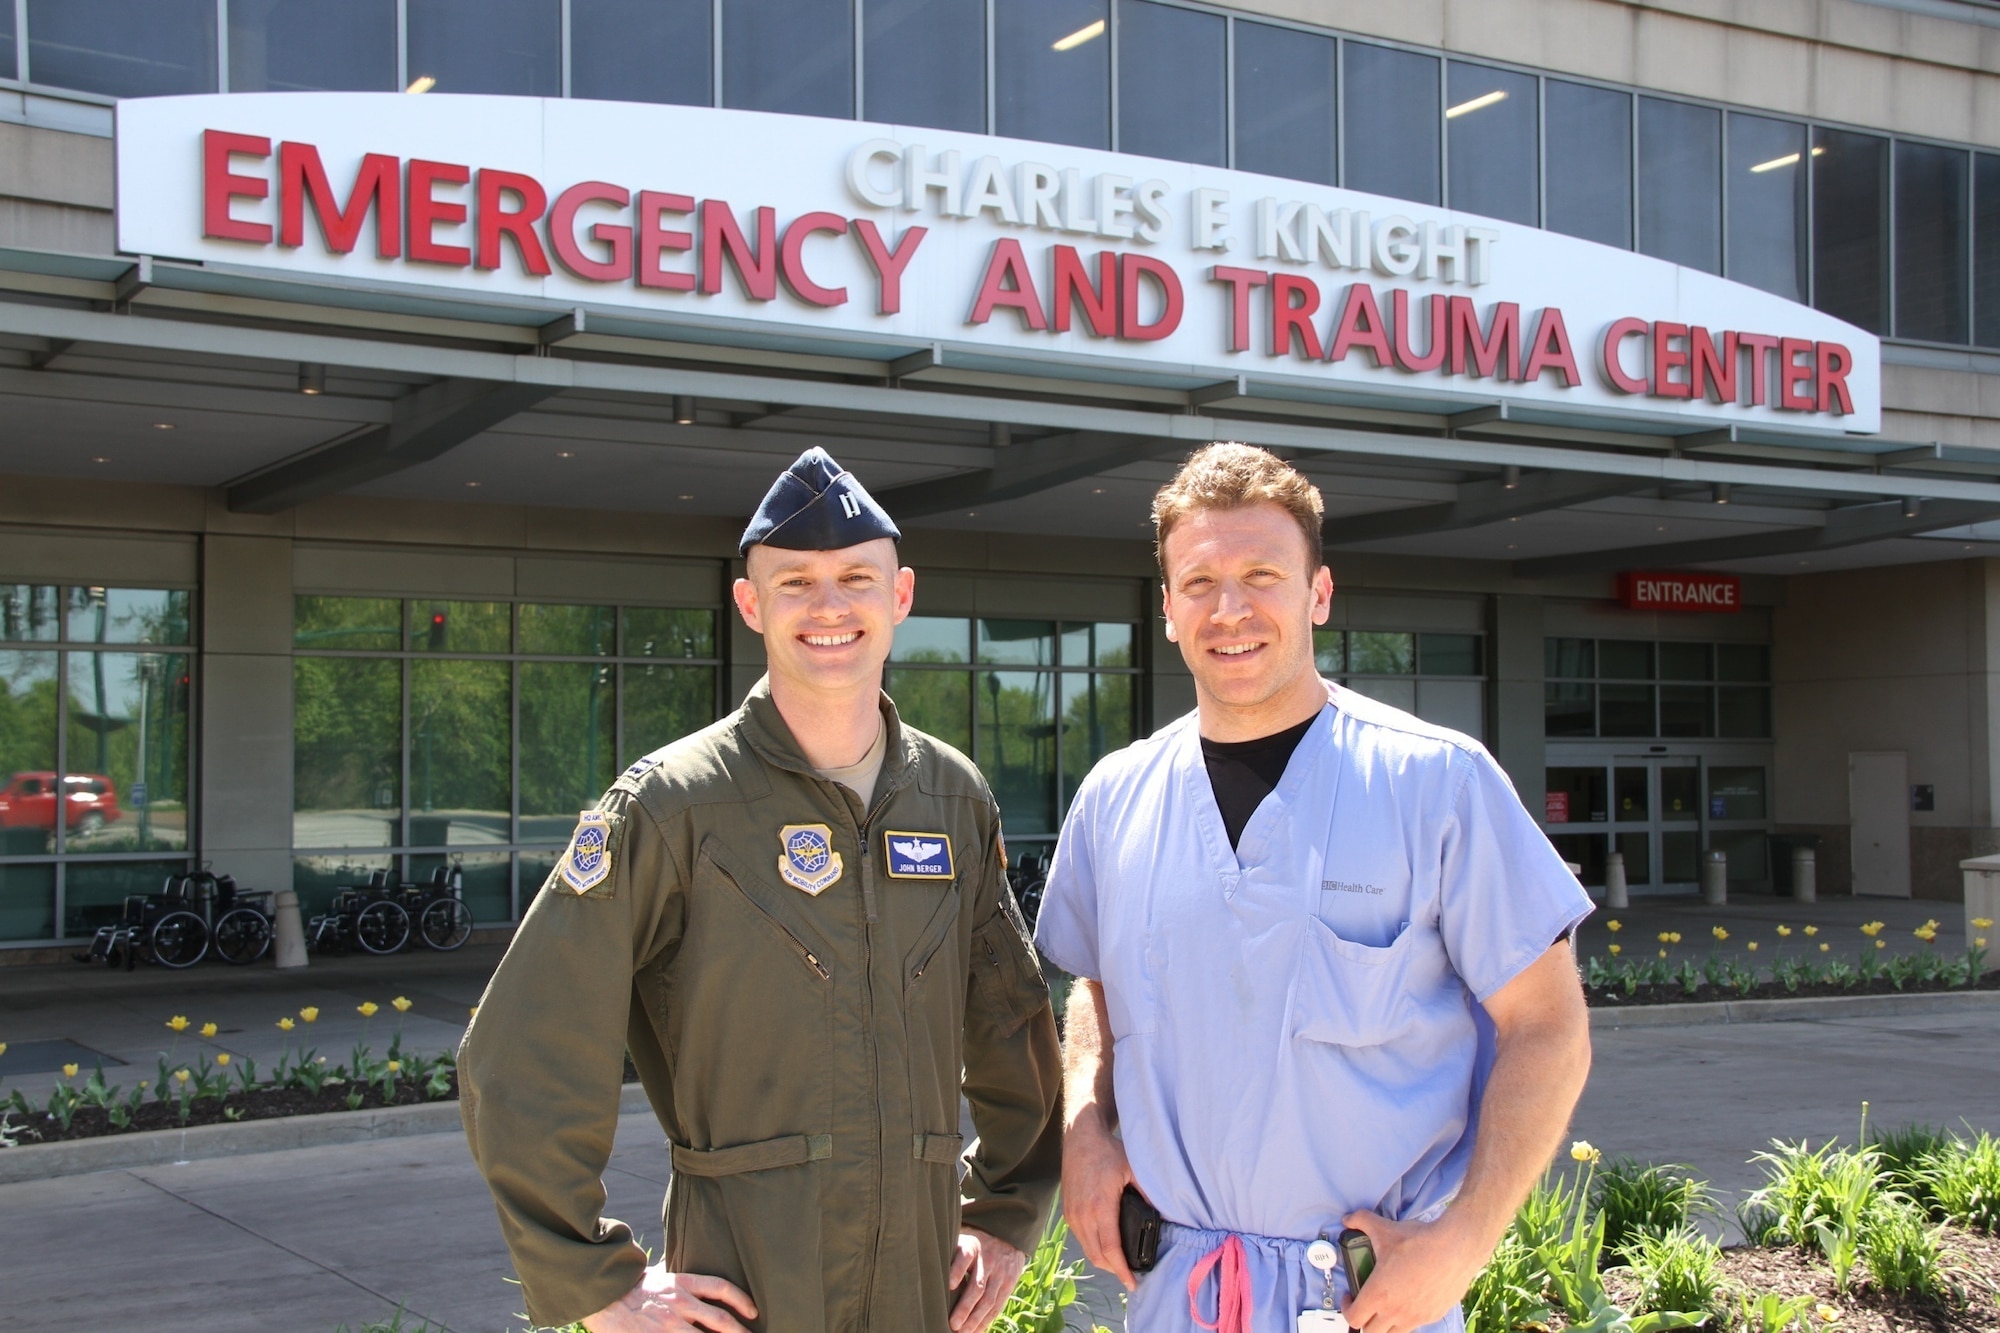 Lt. Col. John Berger and Dr. Scott Farber stand outside the Barnes-Jewish Hospital Emergency Department in St. Louis, Mo. Dr. Farber was part of the trauma team who saved Berger's life after he was hit by a truck in 2012. (Courtesy Photo)